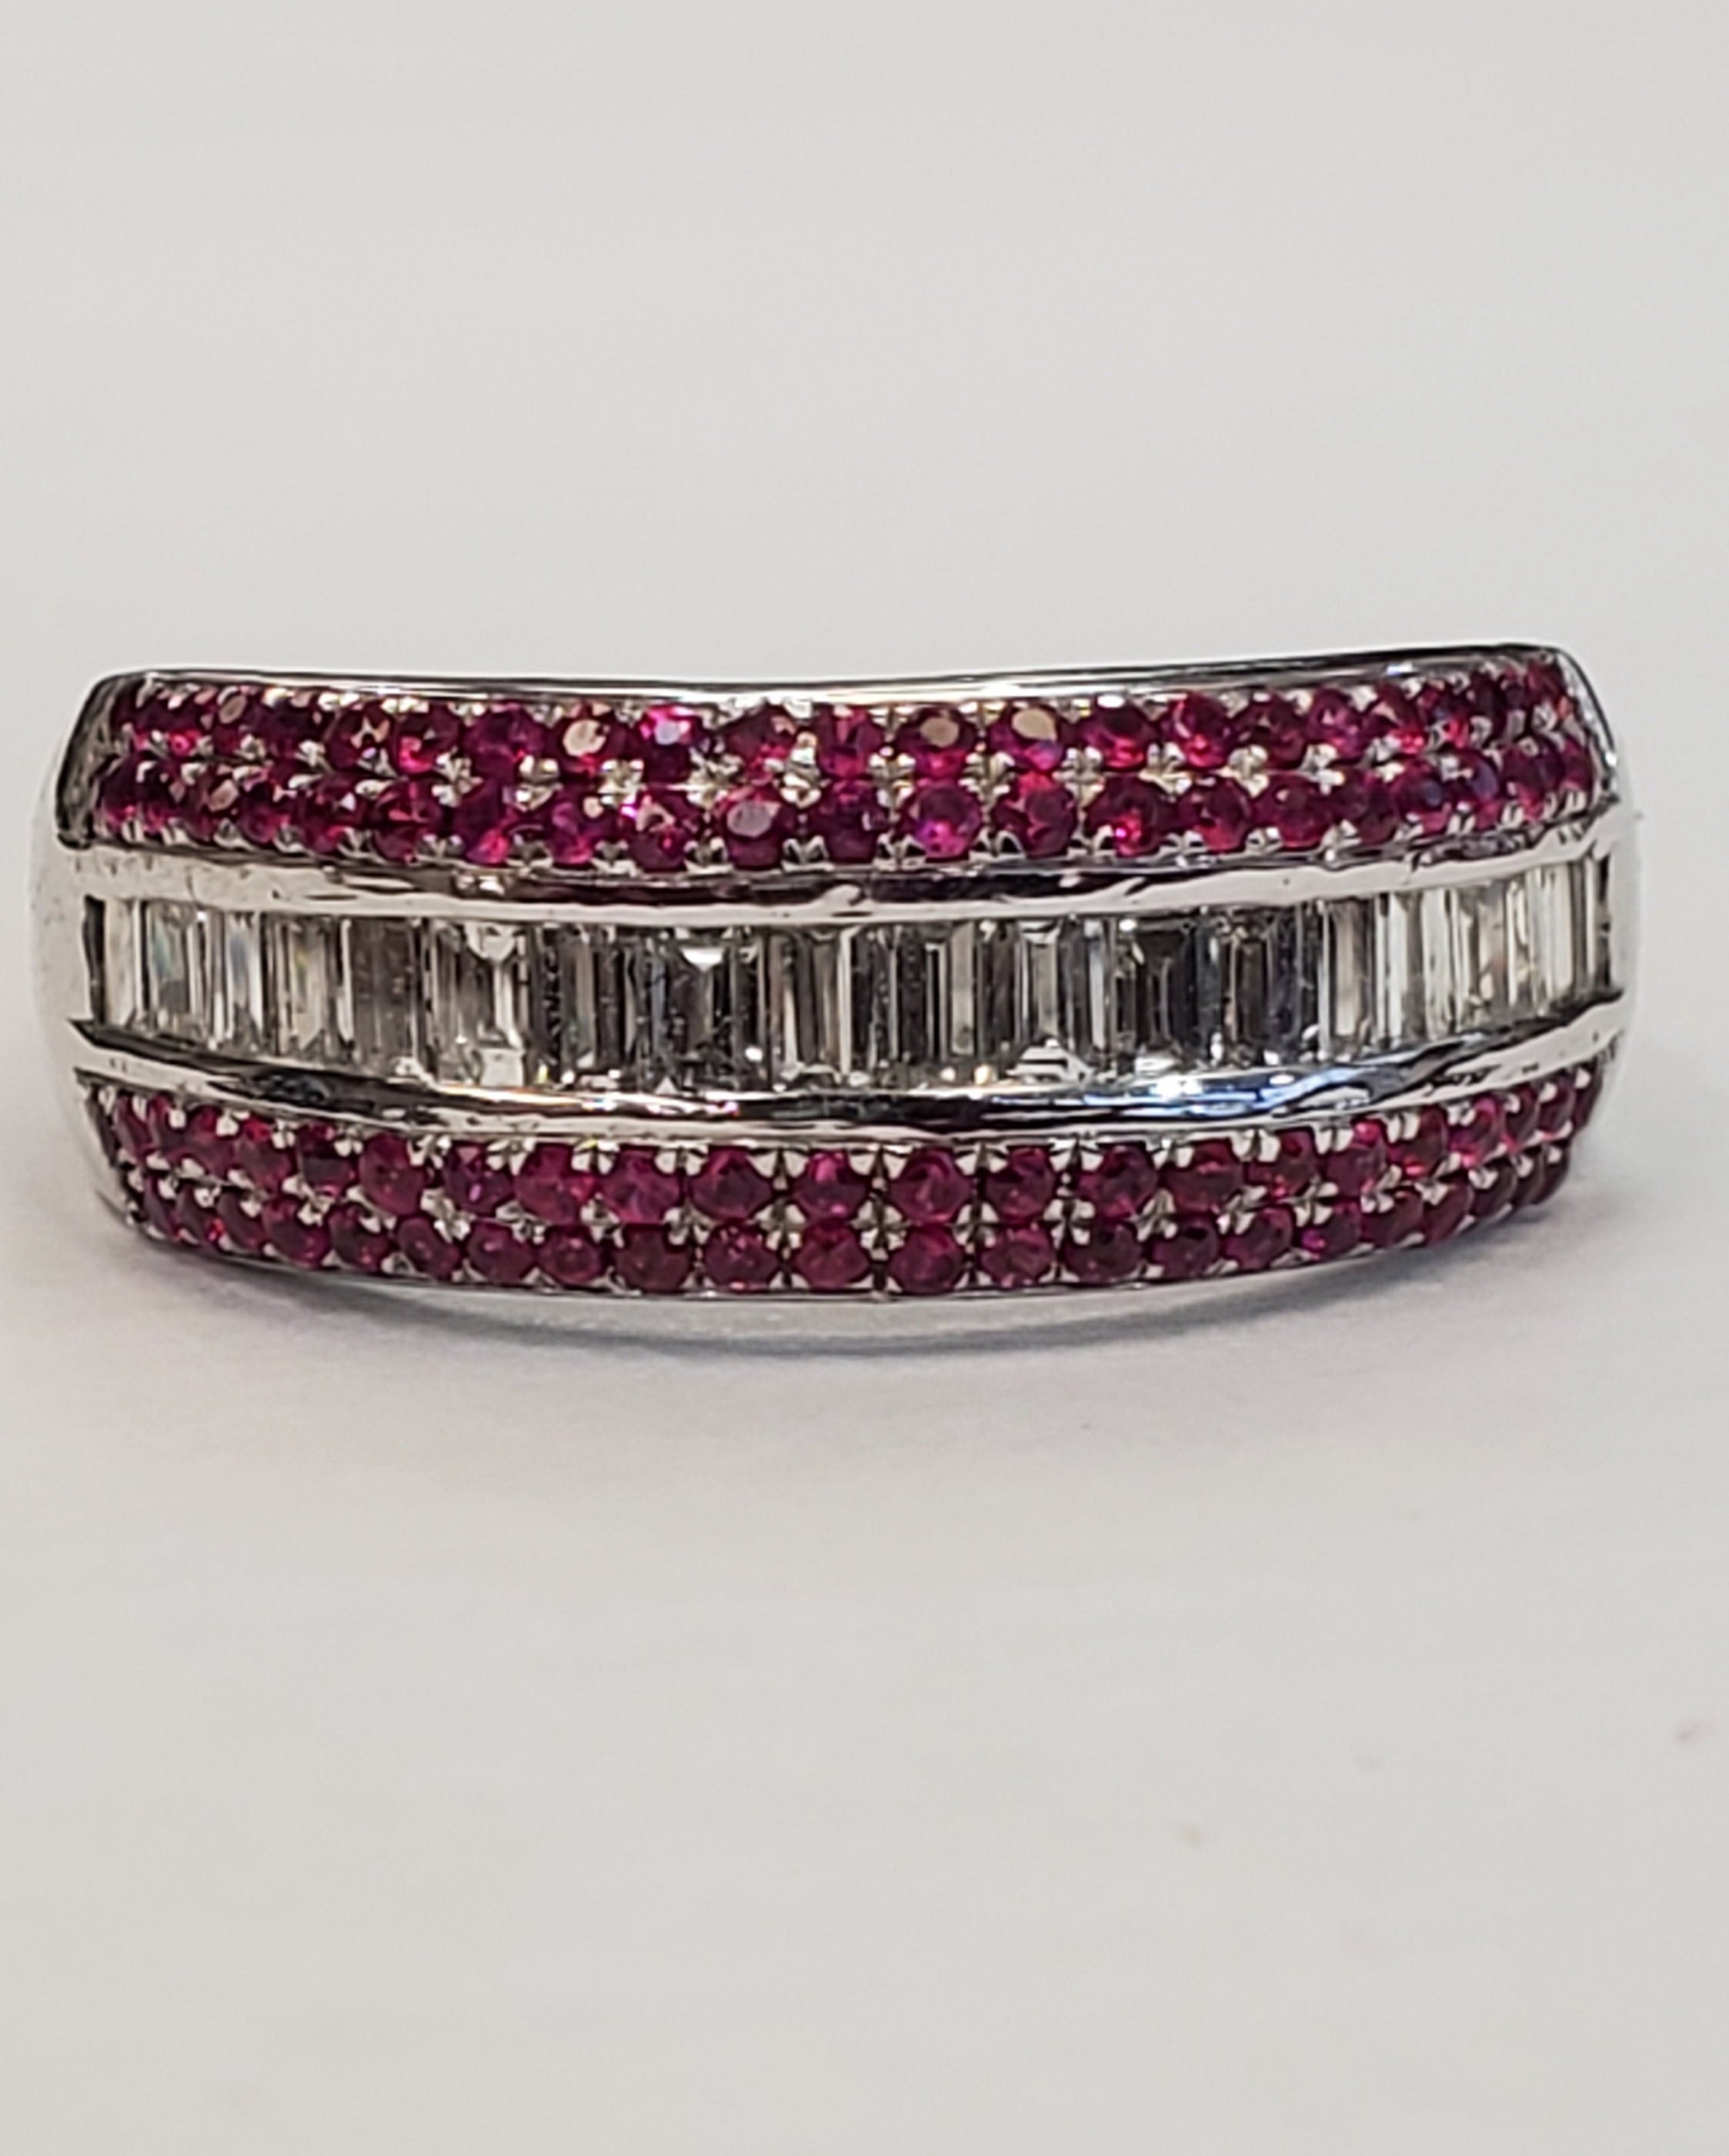 1.14cttw baguette diamond and .50cttw ruby 18k white gold band ring size 10.5